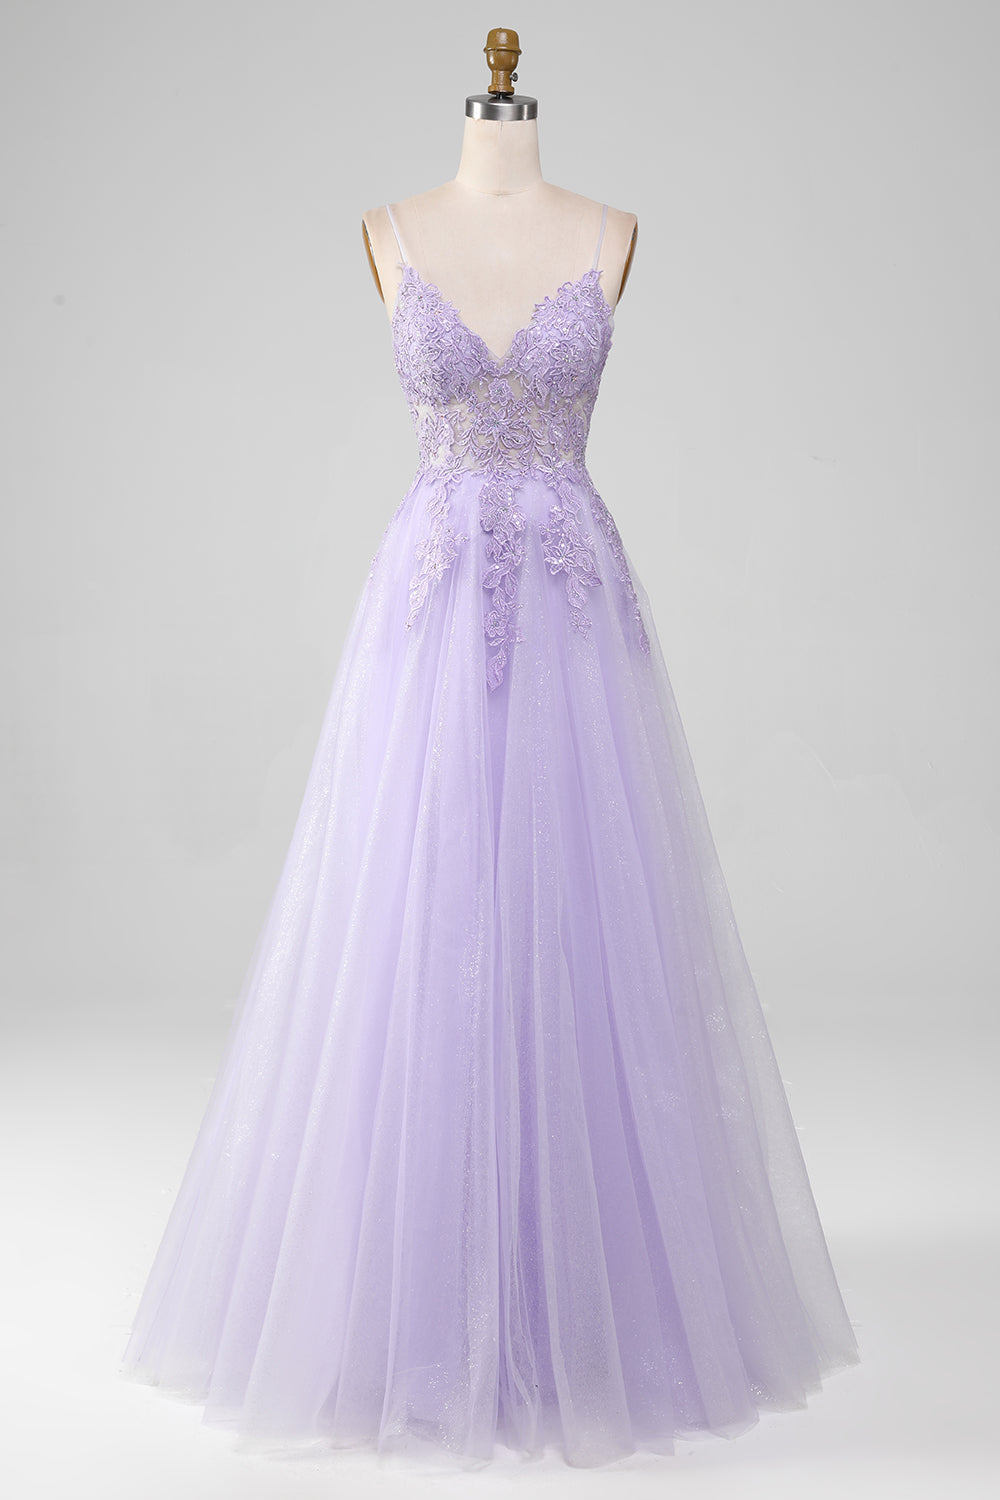 Light Purple A-Line Spaghetti Straps Long Sparkly Prom Dress With Beading